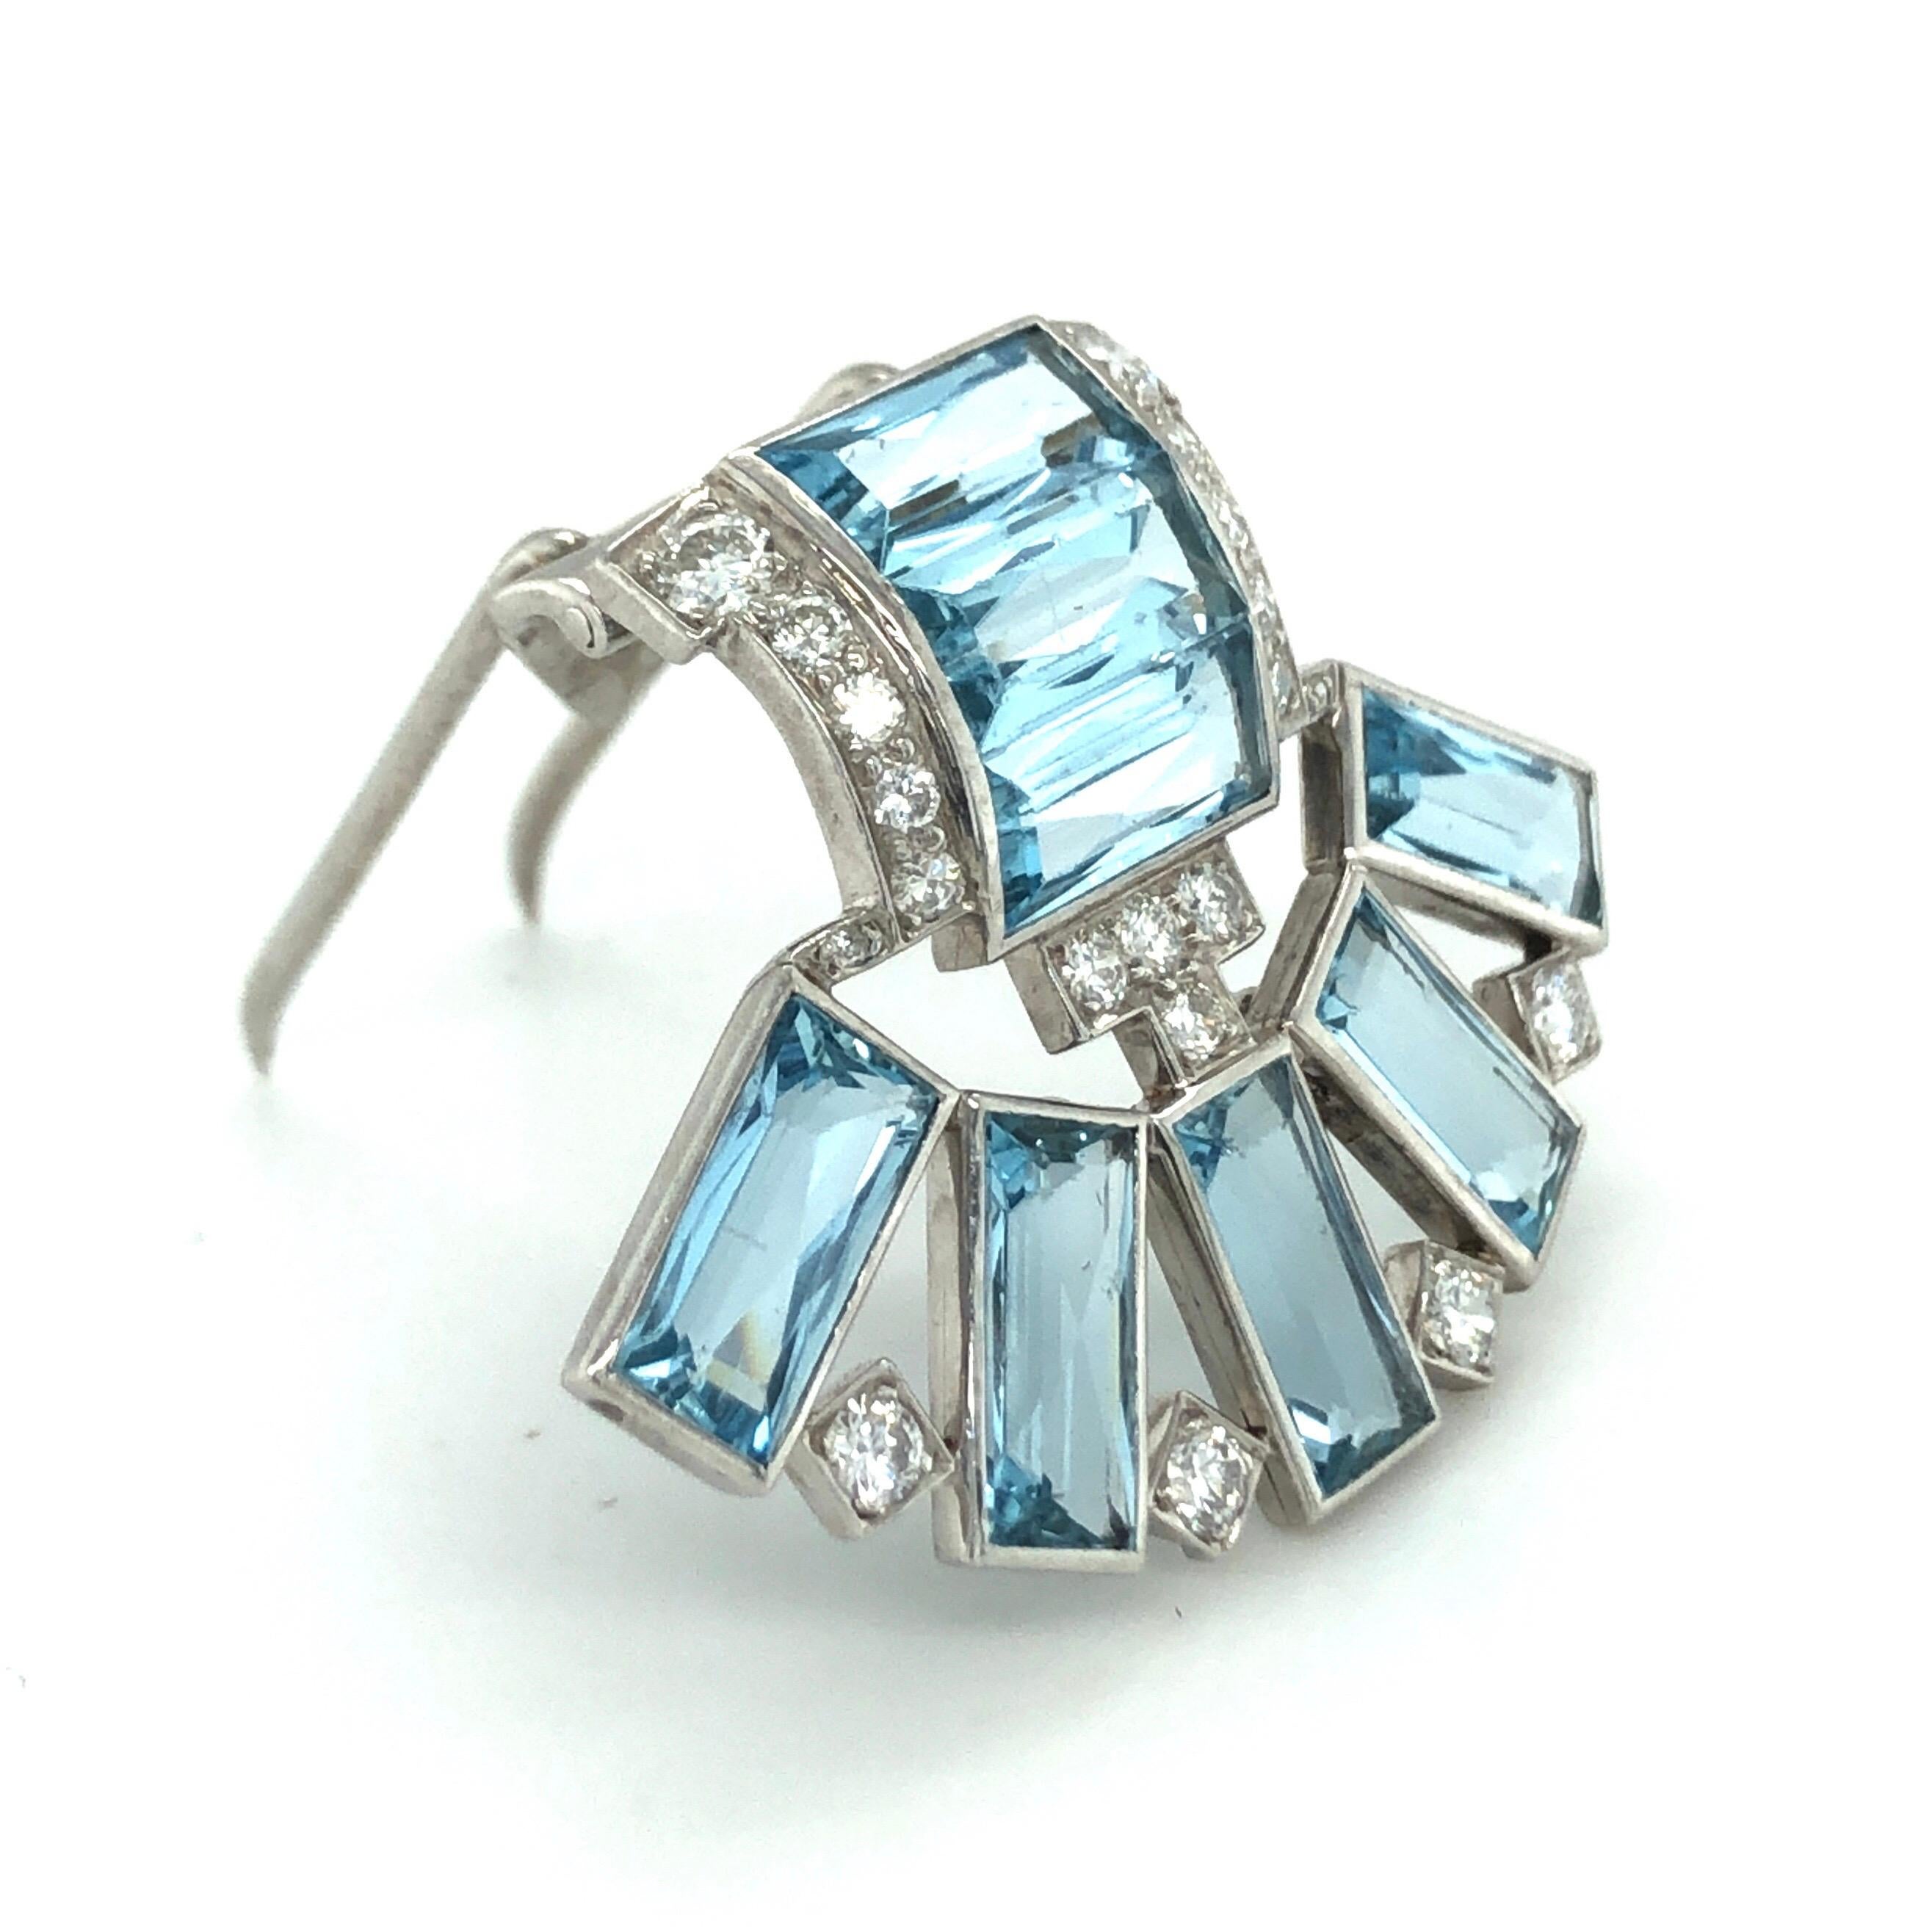 Superb Art Déco aquamarine diamond platinum clip by Cartier.
Designed as an open fan and set with 8 baguette-shaped aquamarines totalling circa 9.60 carats and 20 old-cut and single-cut diamonds totalling circa 0.50 carats. The clip is completed by